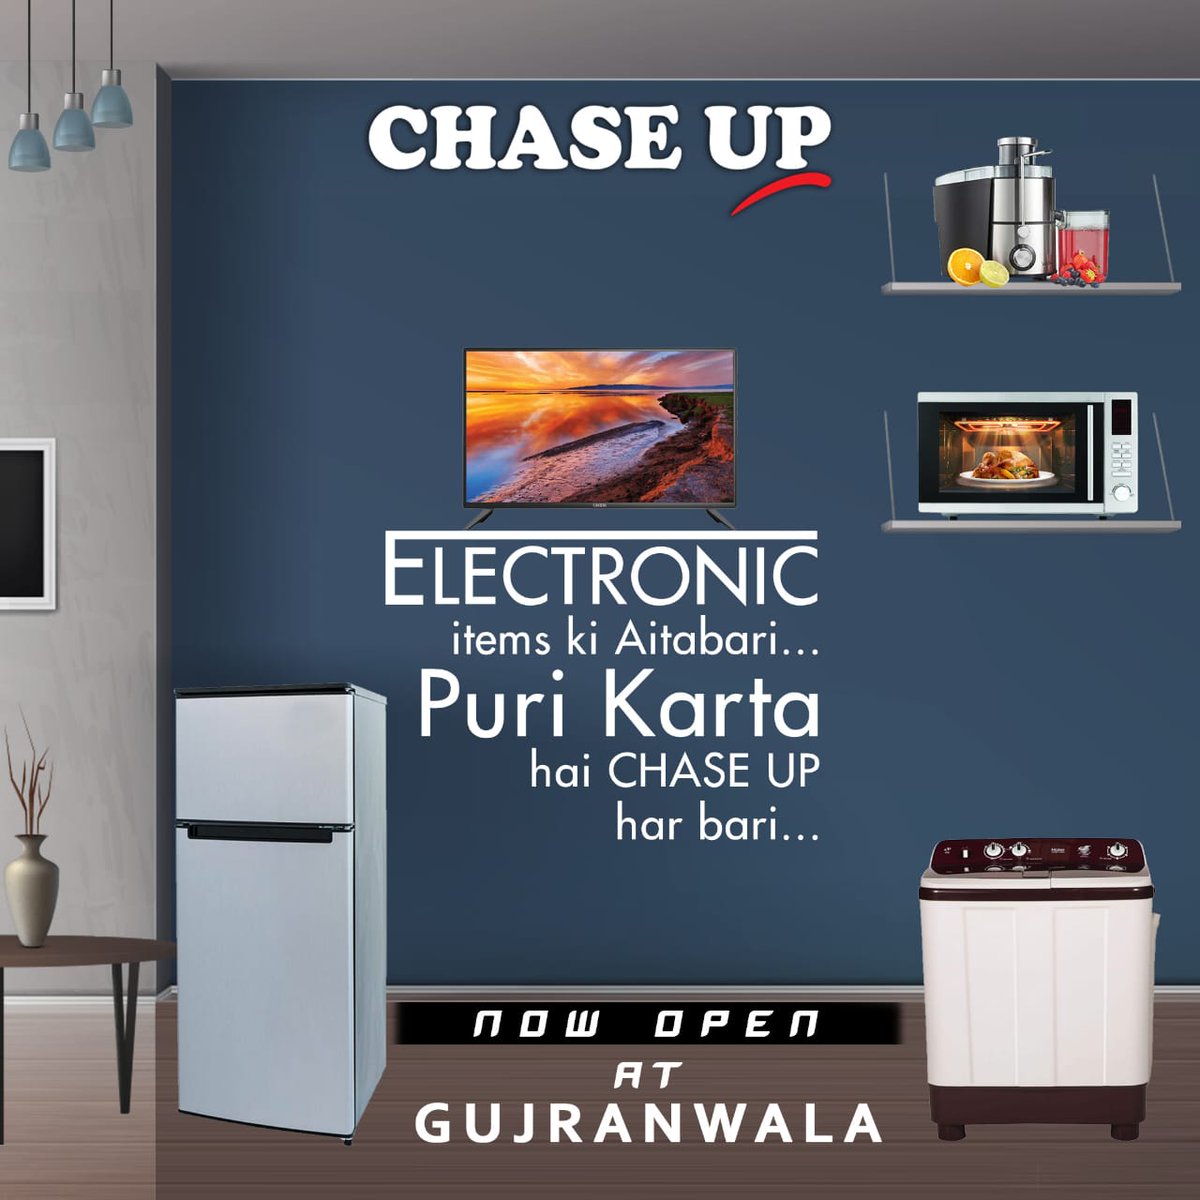 After Karachi, now #ChaseUp is opening in Gujranwala.
Visit the store to avail #WholeSaleRates and #DiscountedPrices

#ChaseUpGujranwala